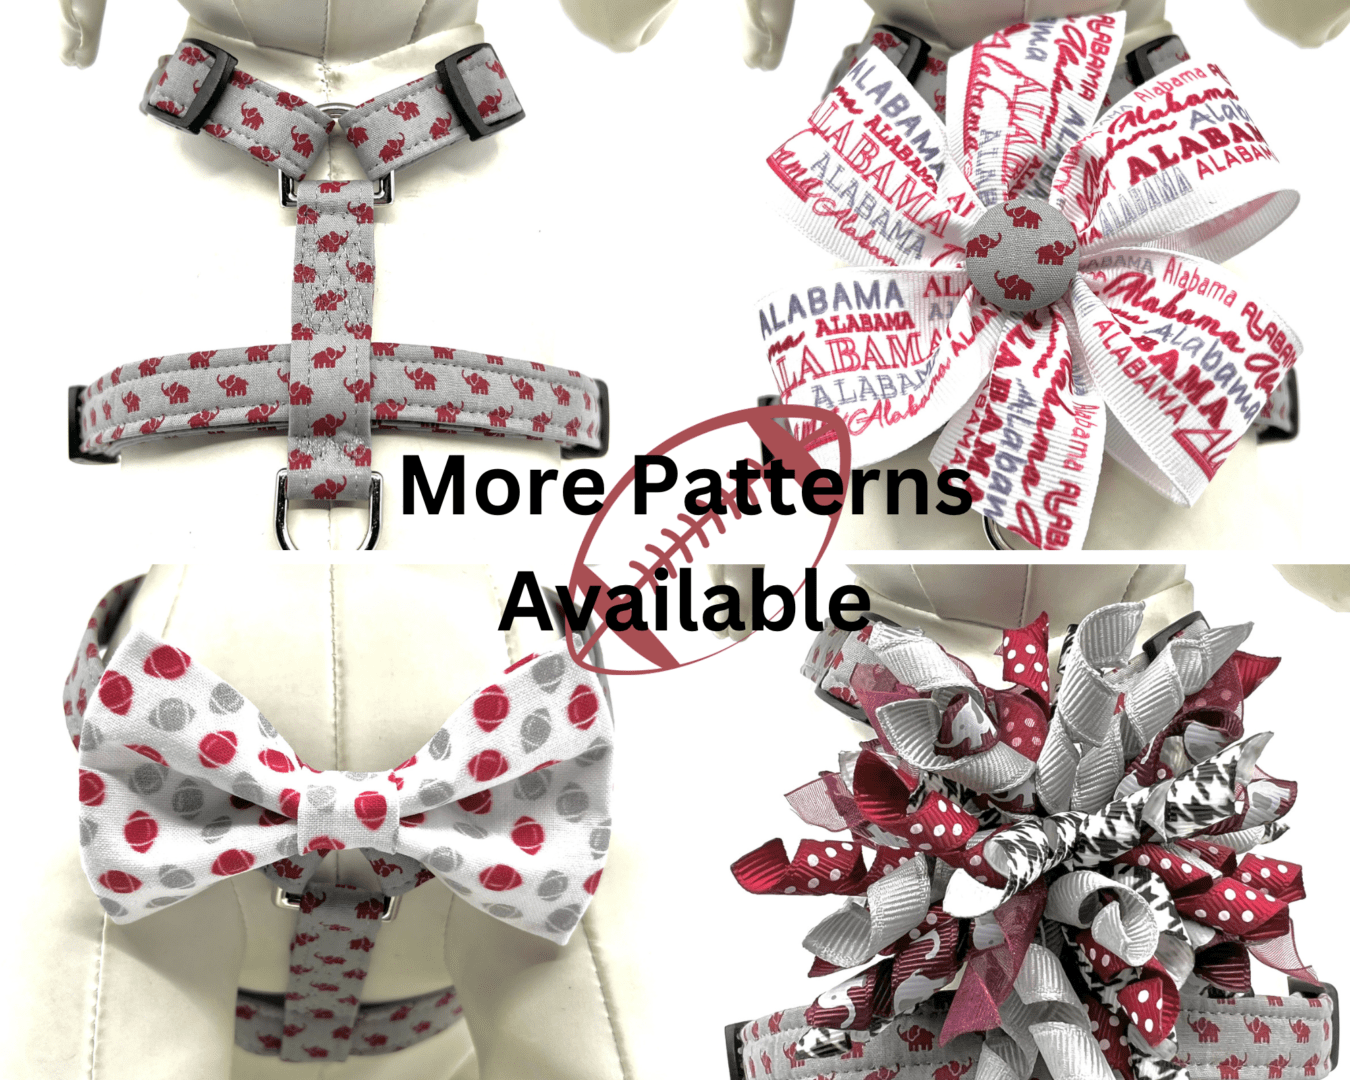 A variety of patterns are available for dog collars and harnesses.